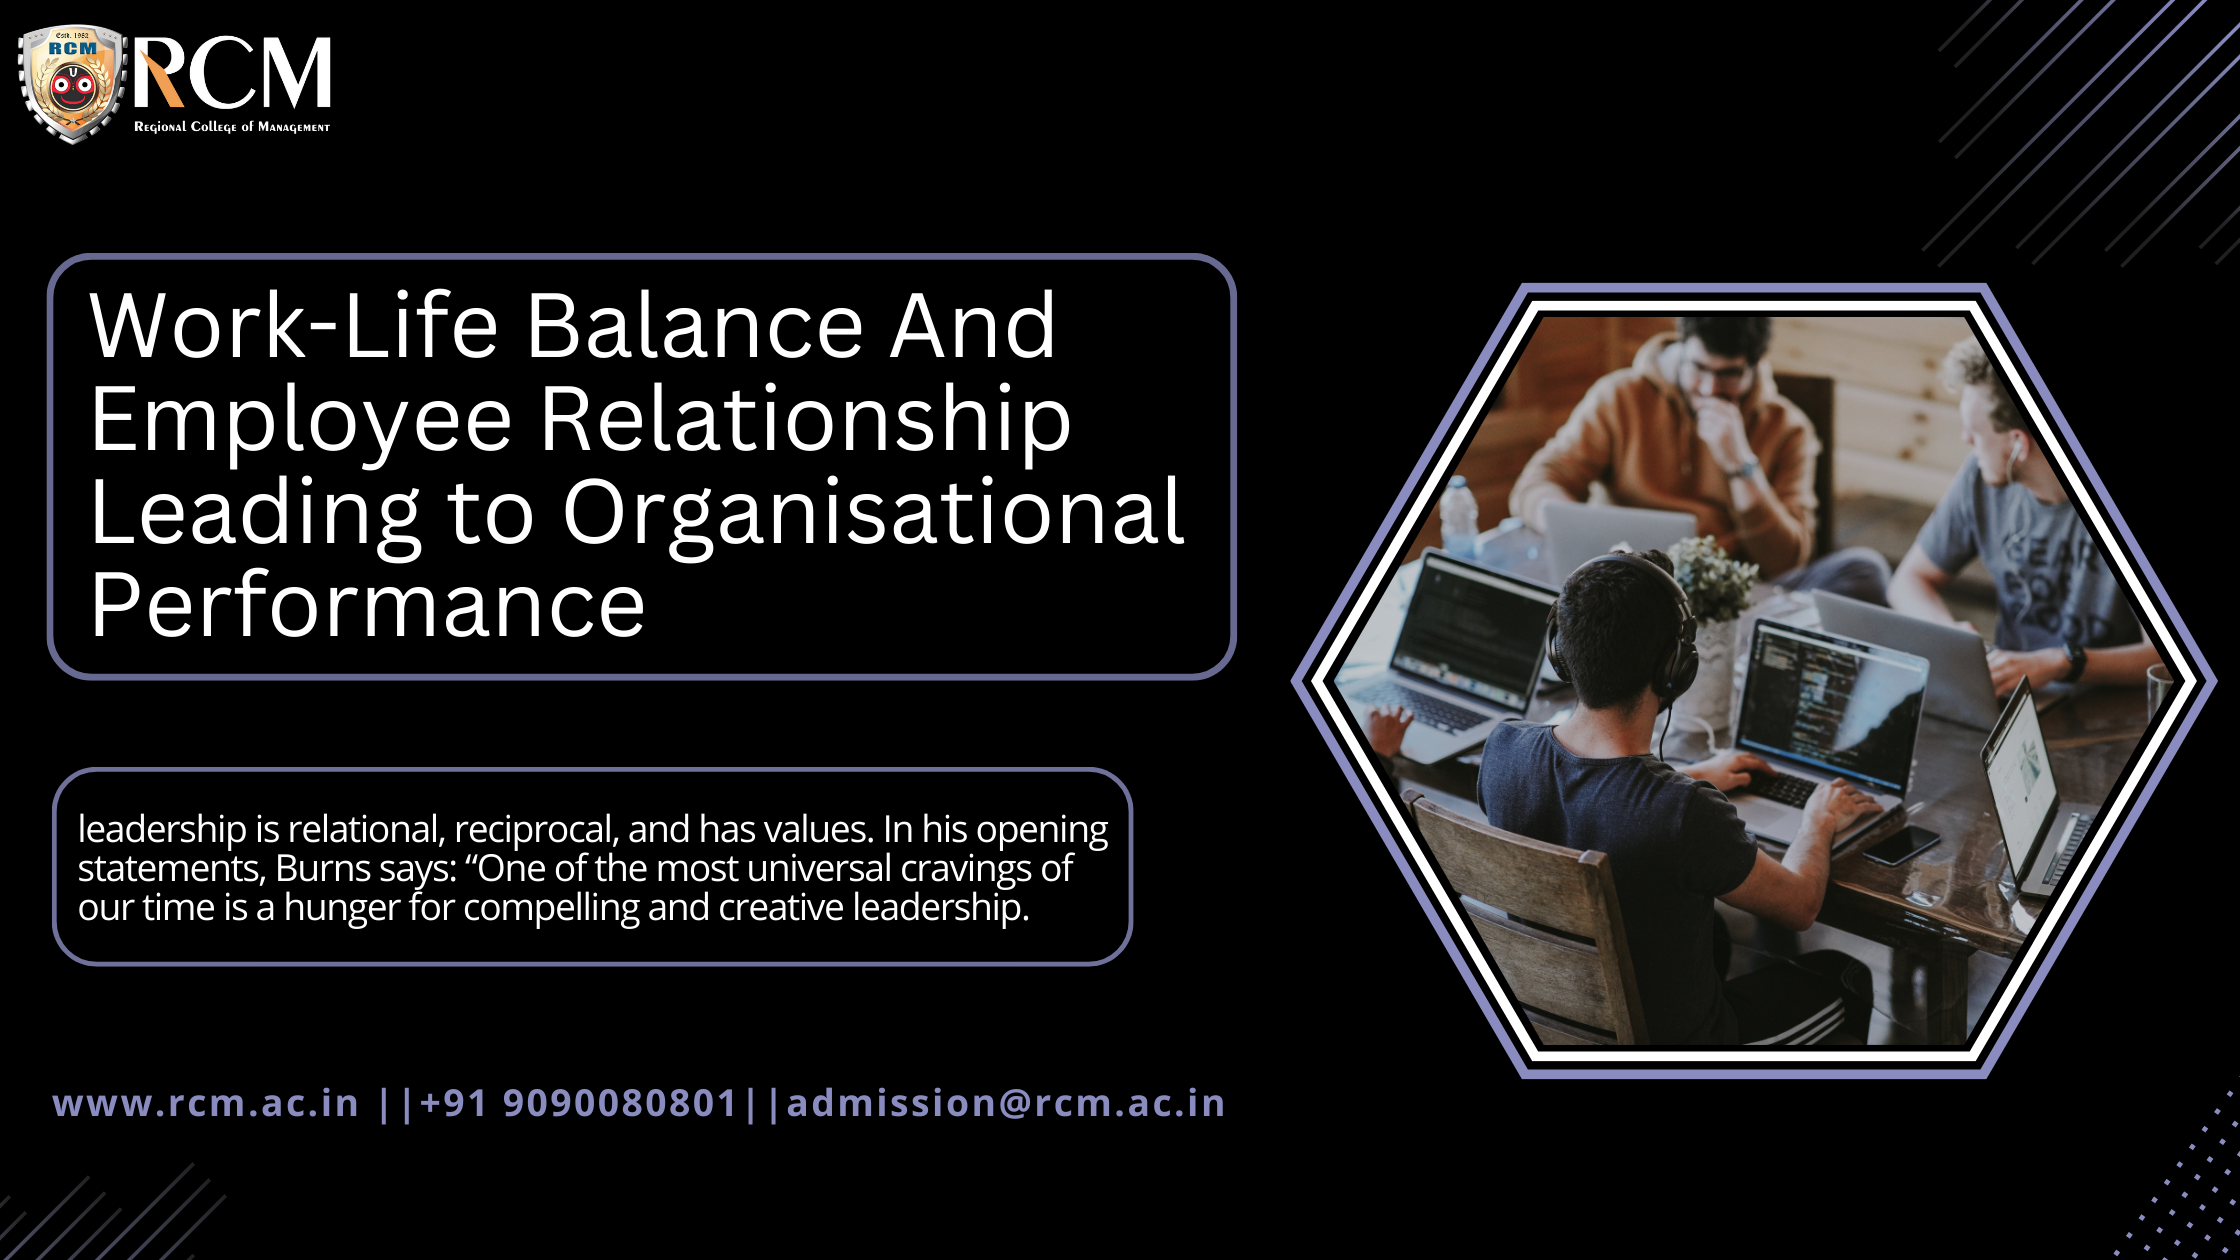 You are currently viewing Work-Life Balance And Employee Relationship Leading to Organisational Performance